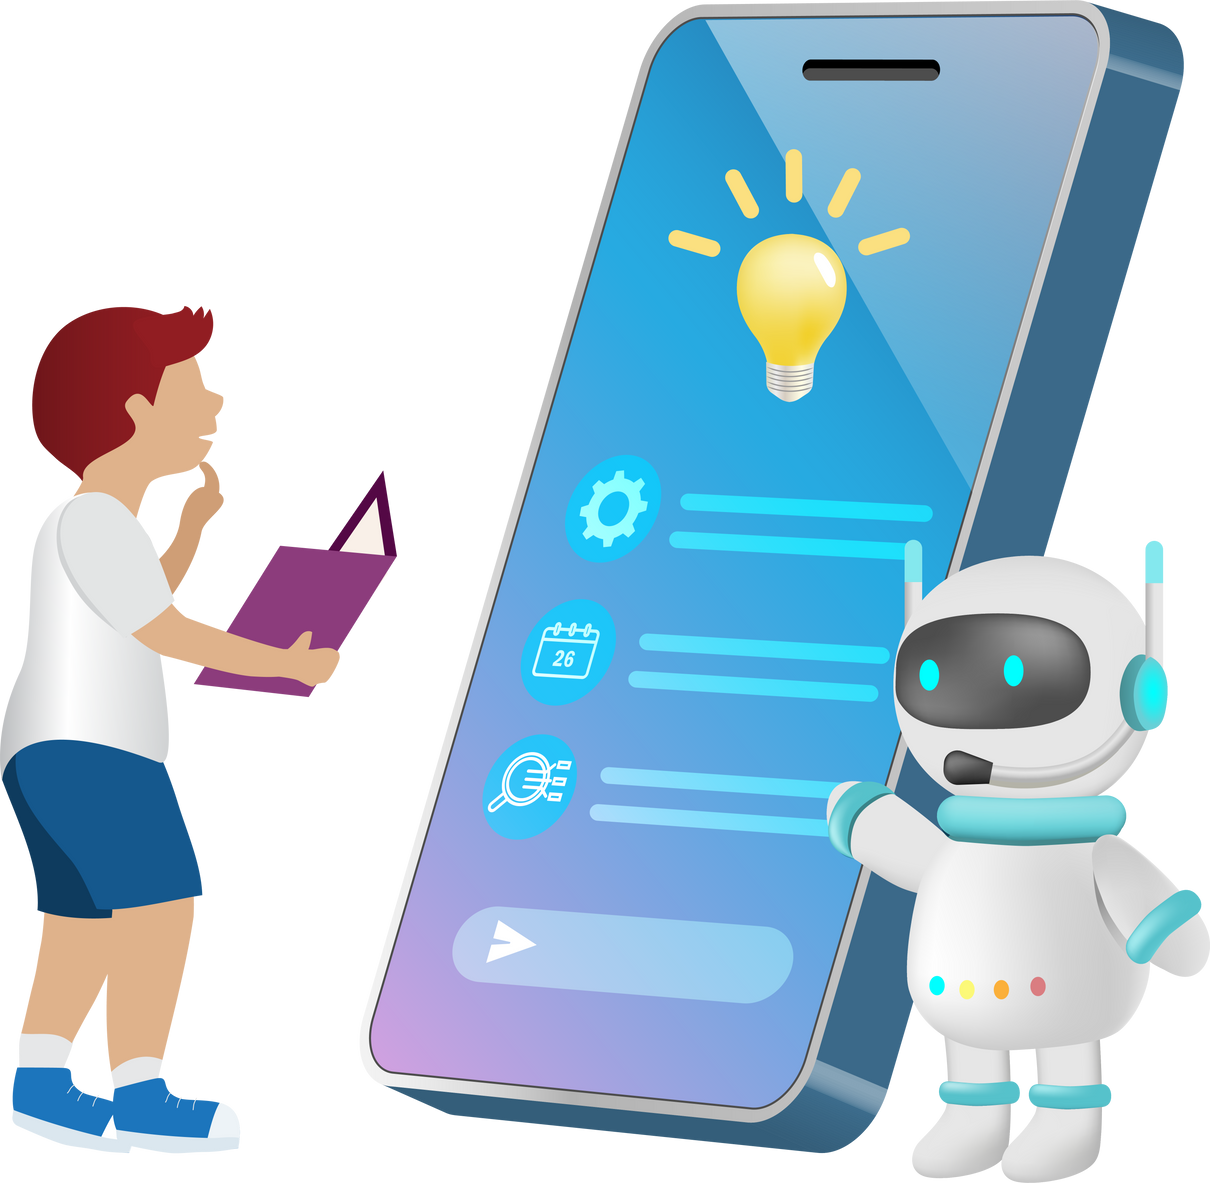 AI chat bot on smartphone assist kid student doing homework assignment. Artificial intelligence robot generates information and summarize knowledge to accomplish tasks in smart solution. Education Technology.